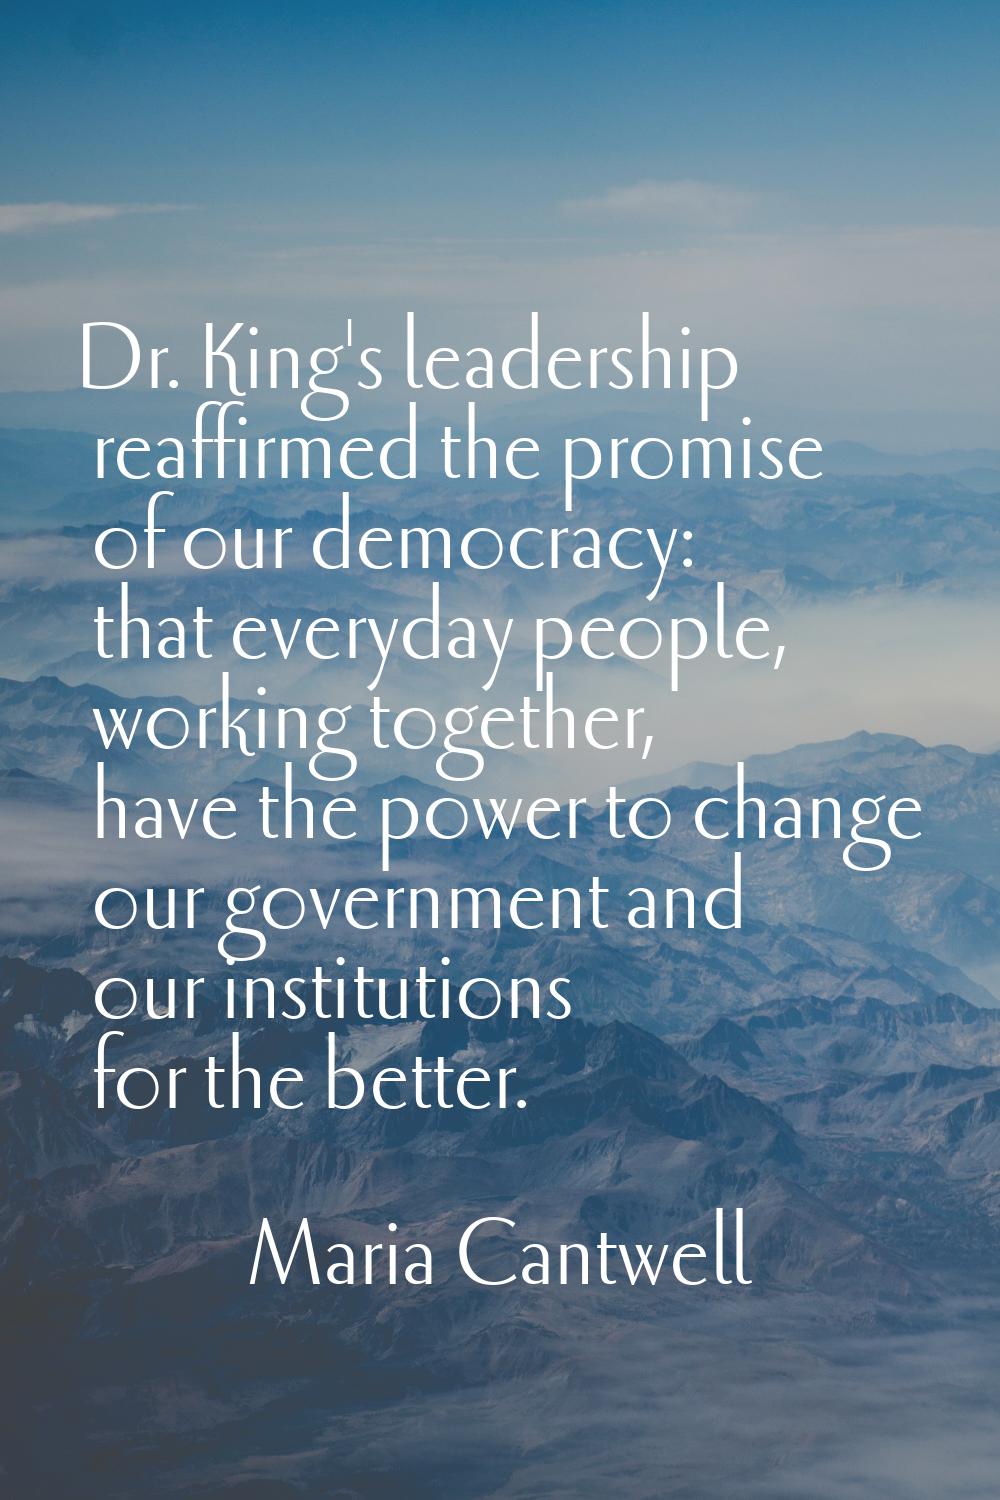 Dr. King's leadership reaffirmed the promise of our democracy: that everyday people, working togeth